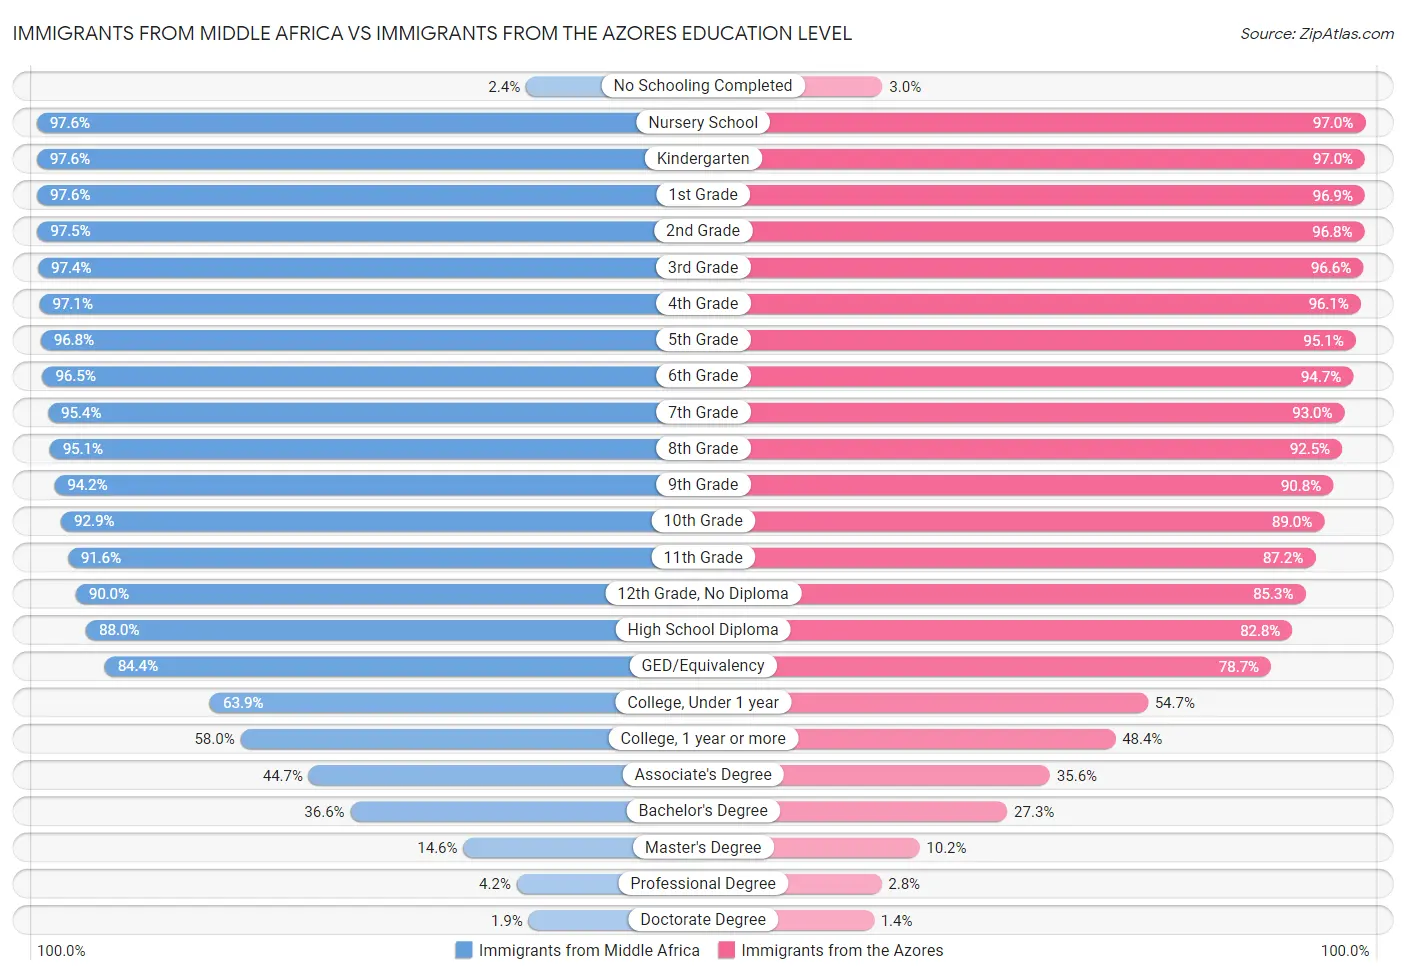 Immigrants from Middle Africa vs Immigrants from the Azores Education Level